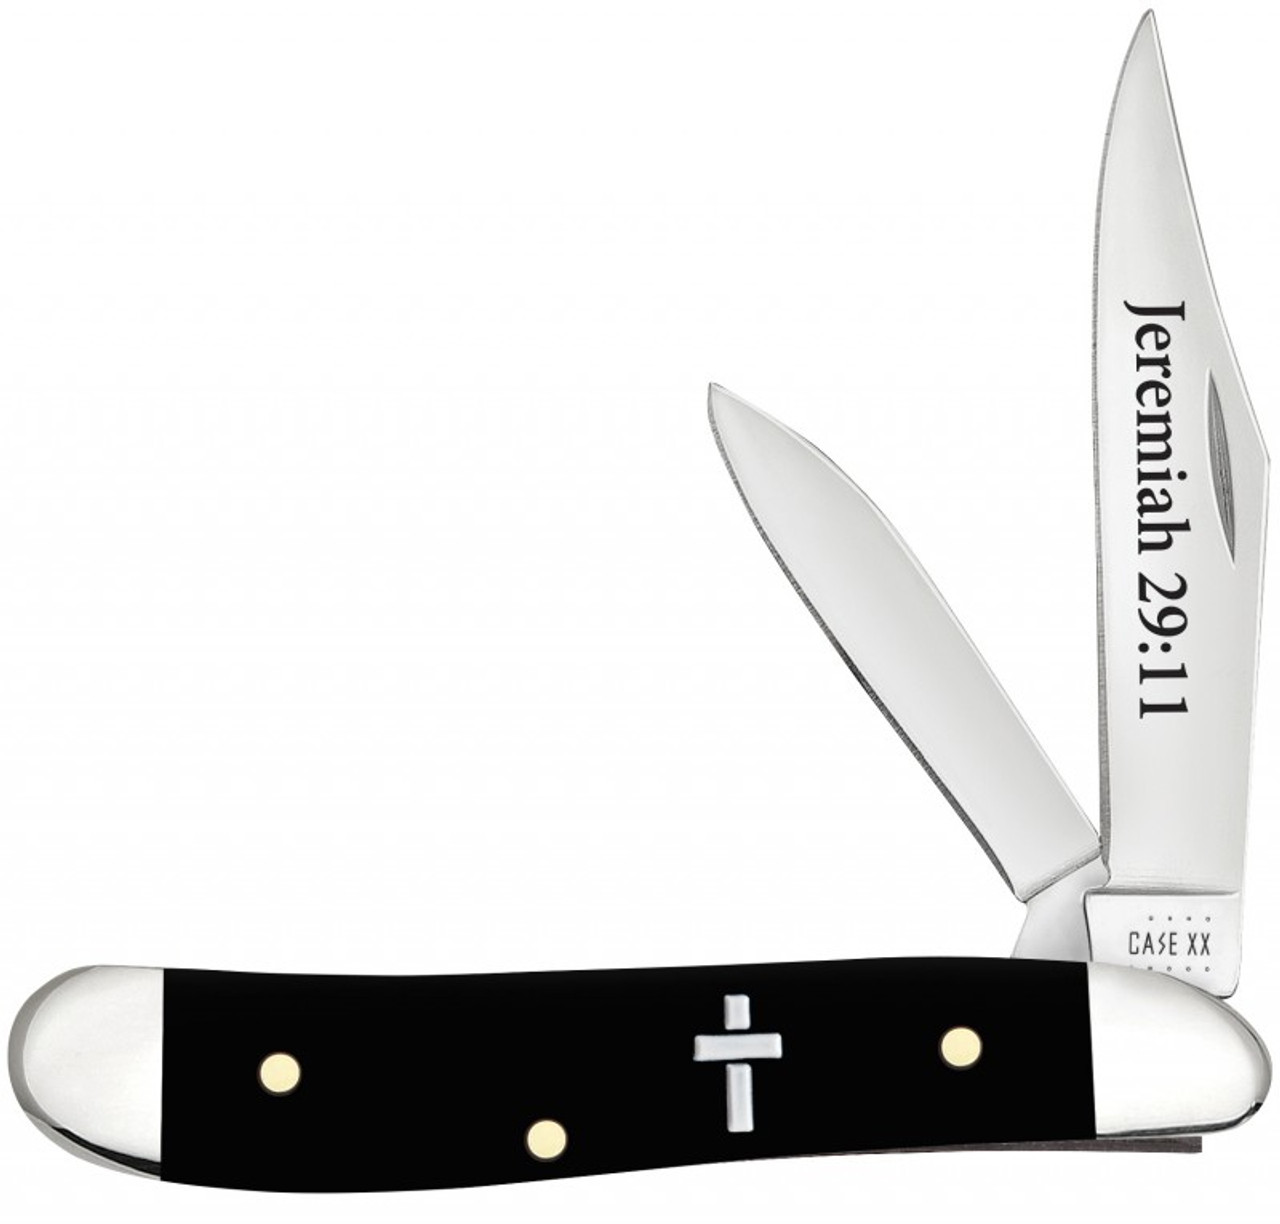 Case Peanut Religious Sayings - Jeremiah 29:11 - 60866 Embellished Smooth Black Synthetic Handle (2220 SS)